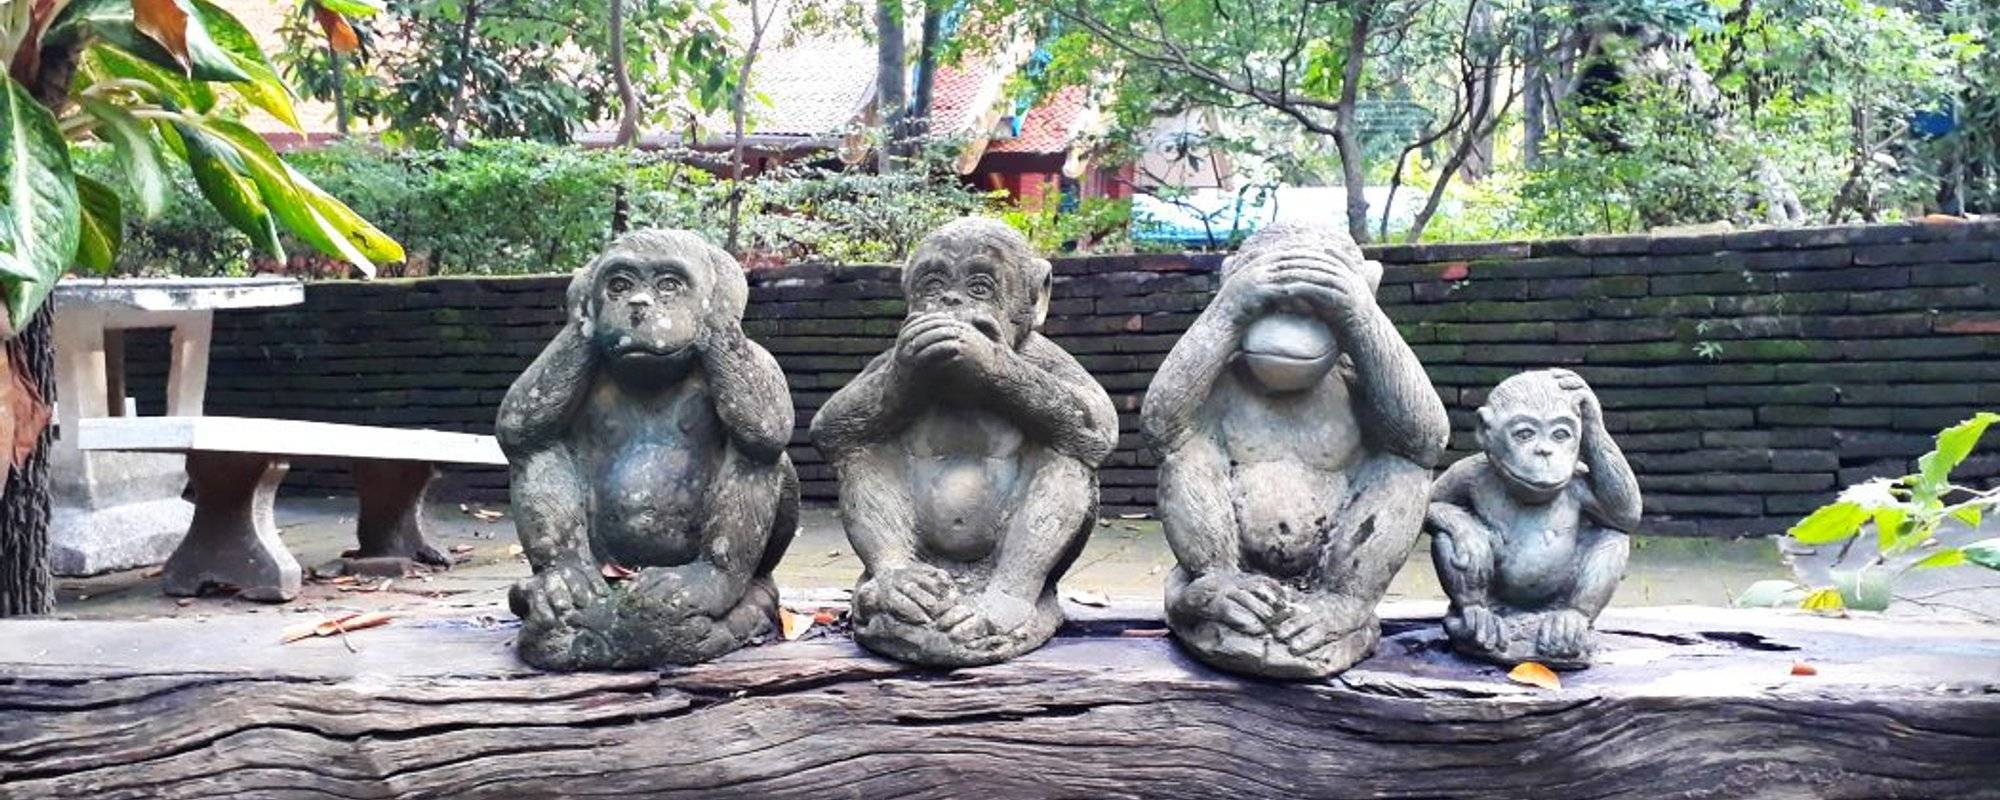 Travel Pro Places of Interest #247: The Buddharma Garden, Chiang Mai Thailand! Final Part Four